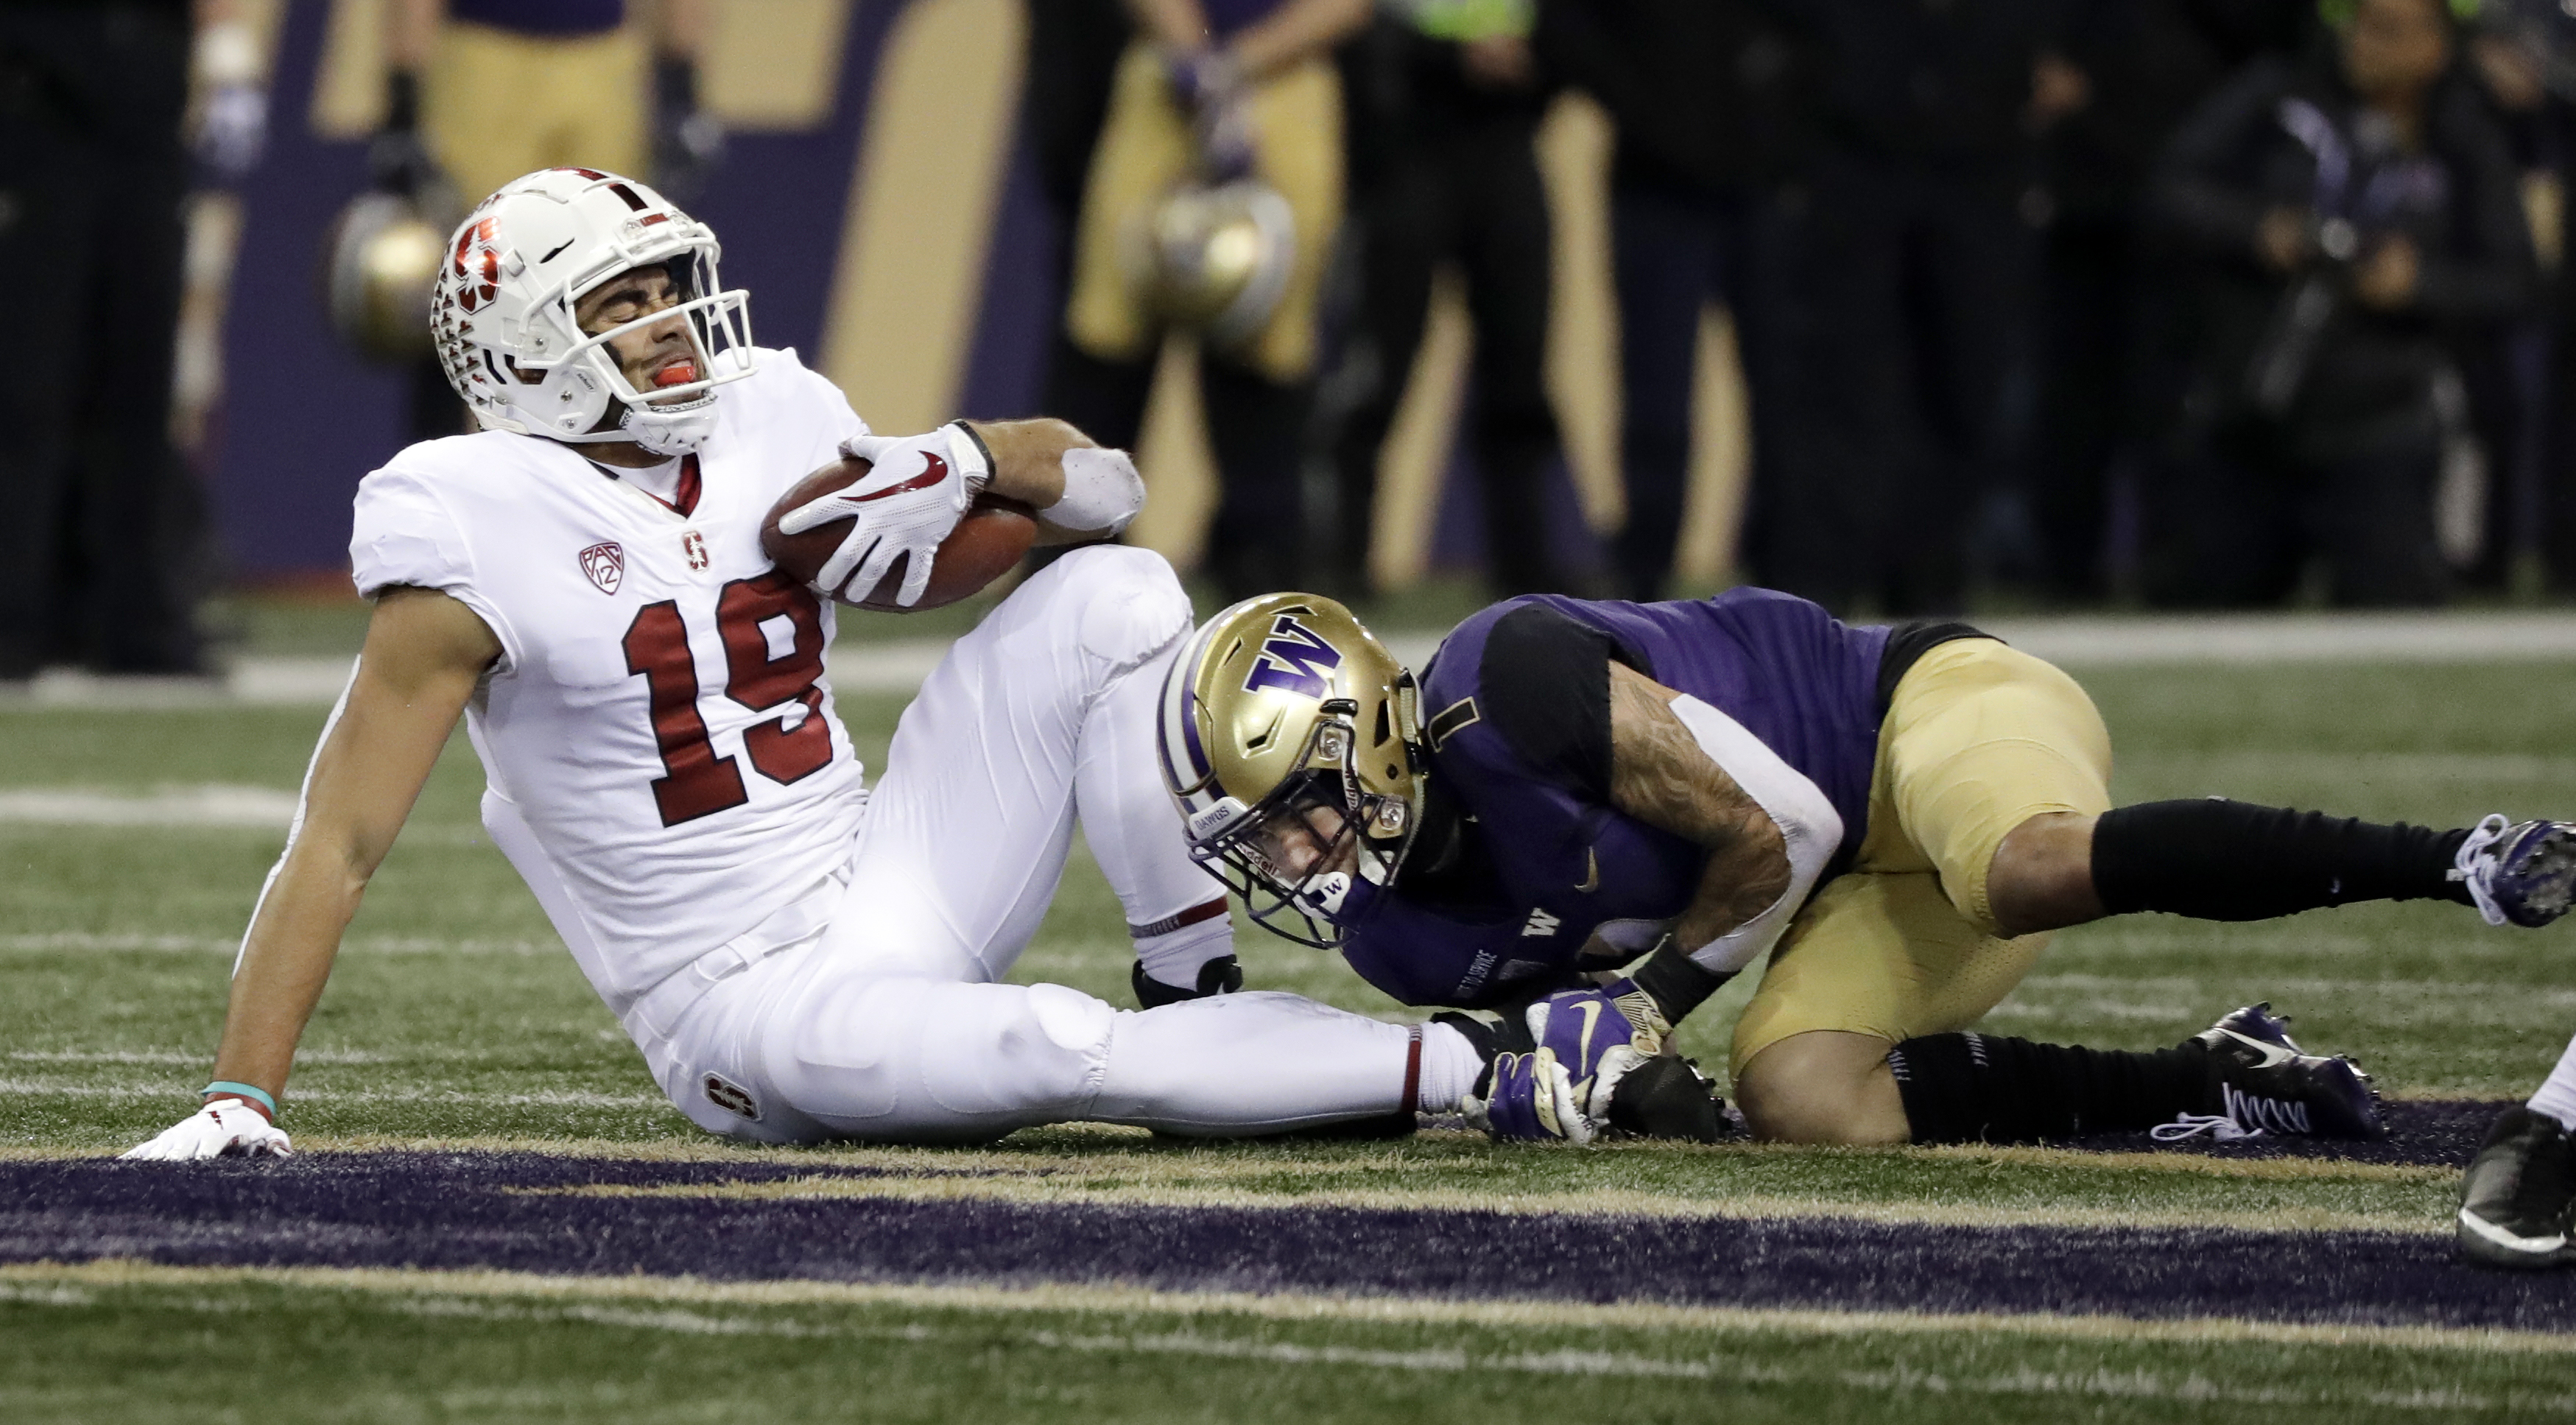 Washington holds off Stanford’s late rally, wins 27-23